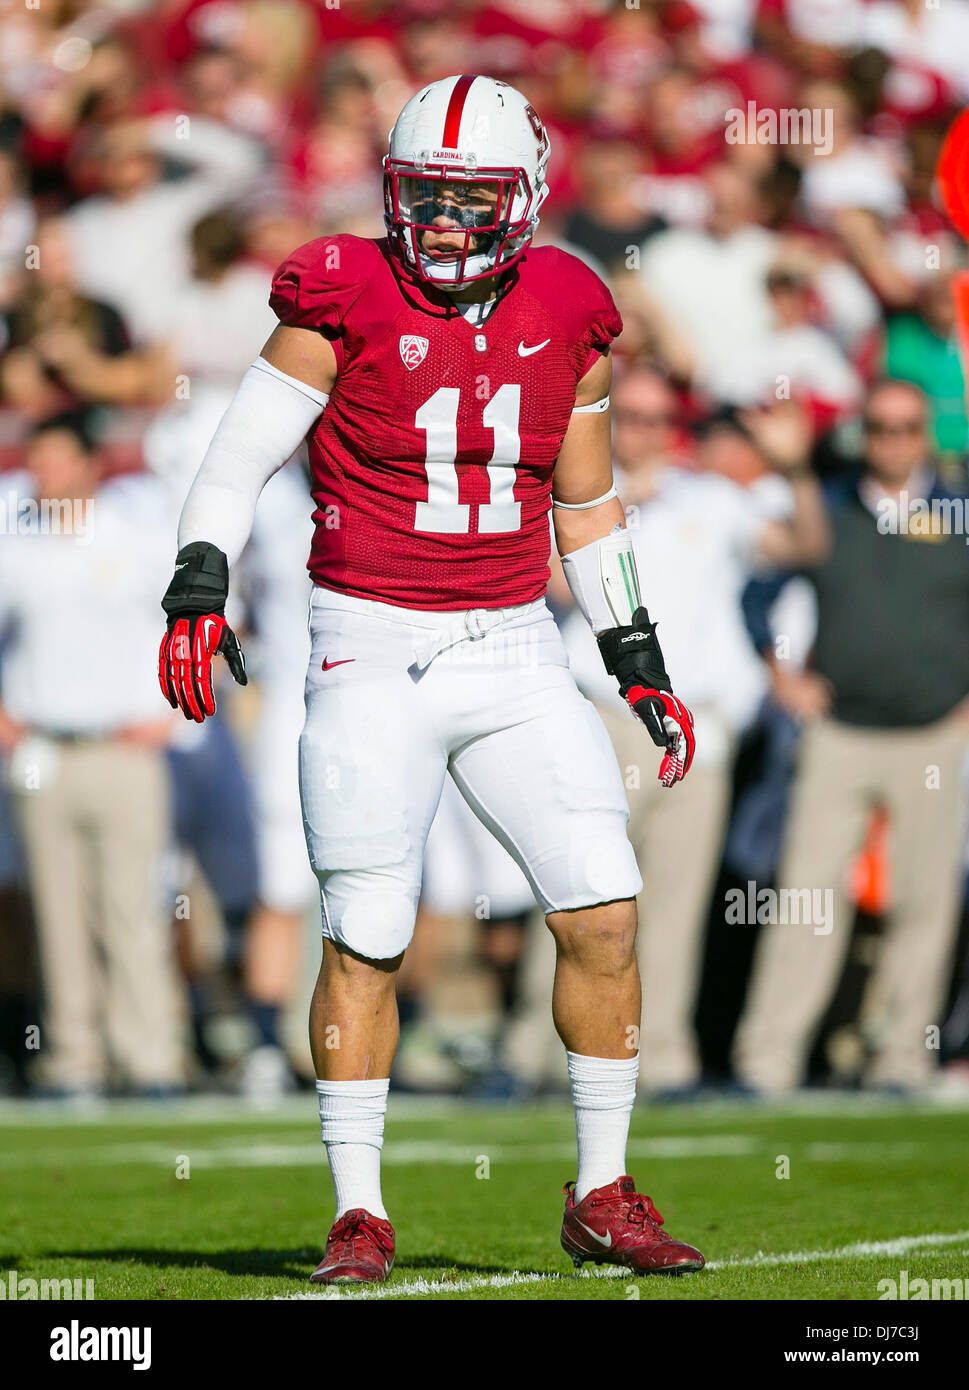 November 23, 2013: Stanford Cardinal linebacker Shayne Skov (11) in action  during the NCAA Football game between the Stanford Cardinal and the  California Golden Bears at Stanford Stadium in Palo Alto, CA.